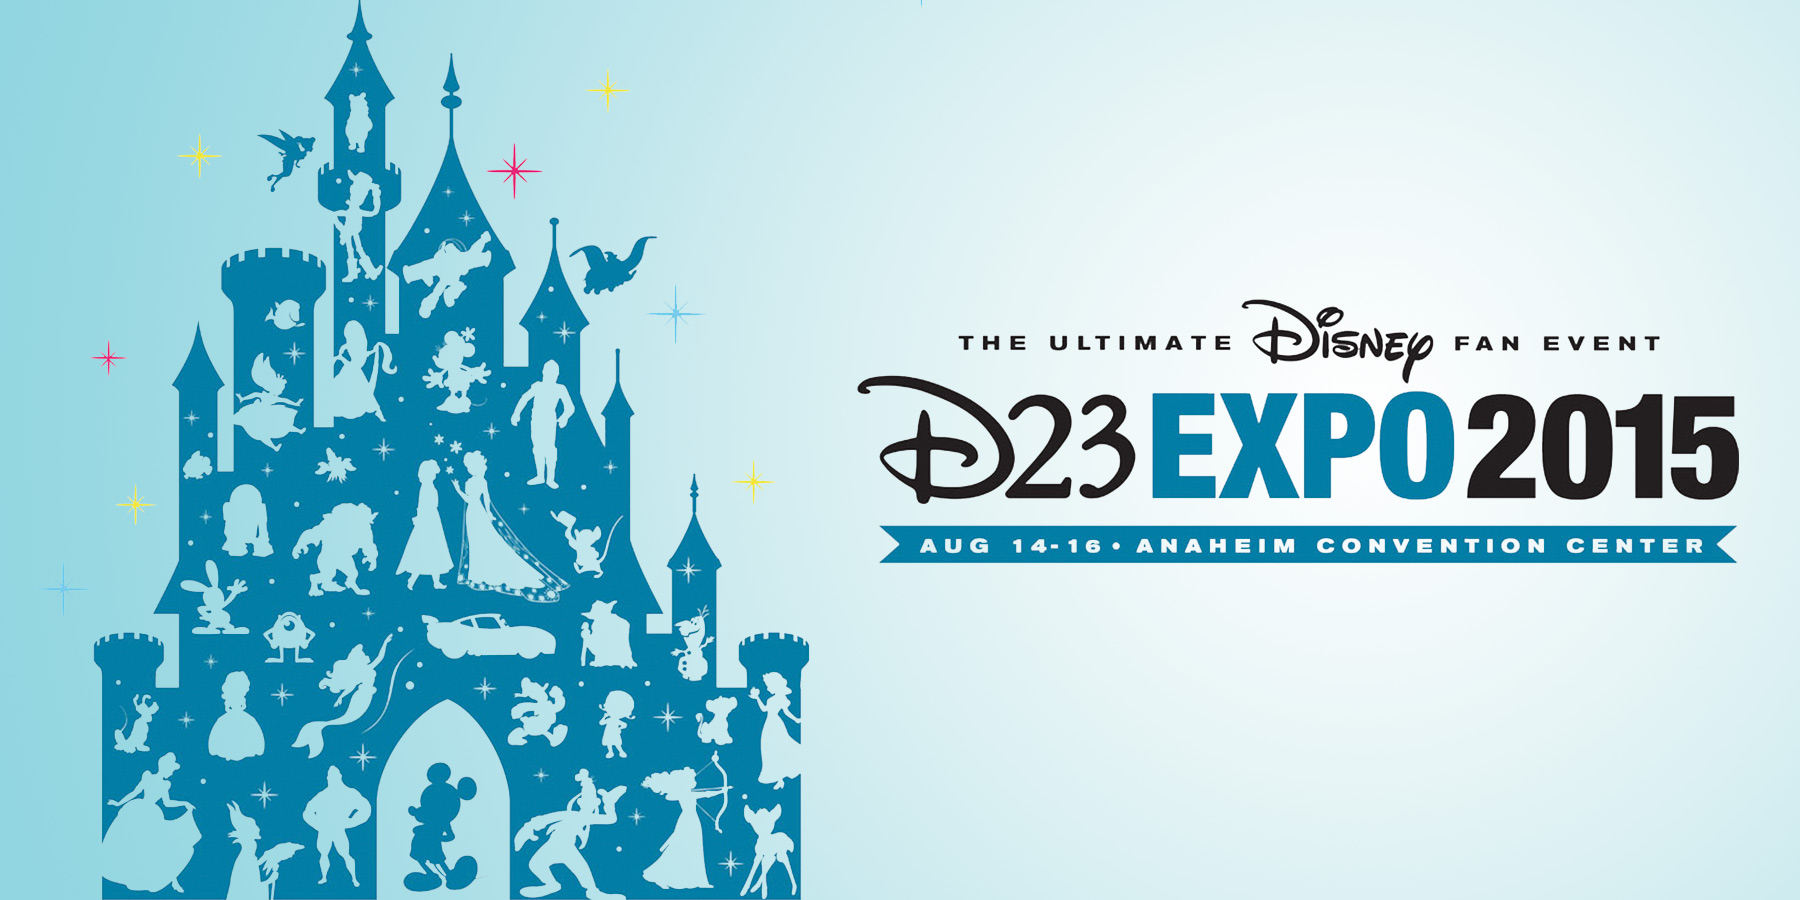 D23 Expo Like You've Never Seen It! #D23Expo